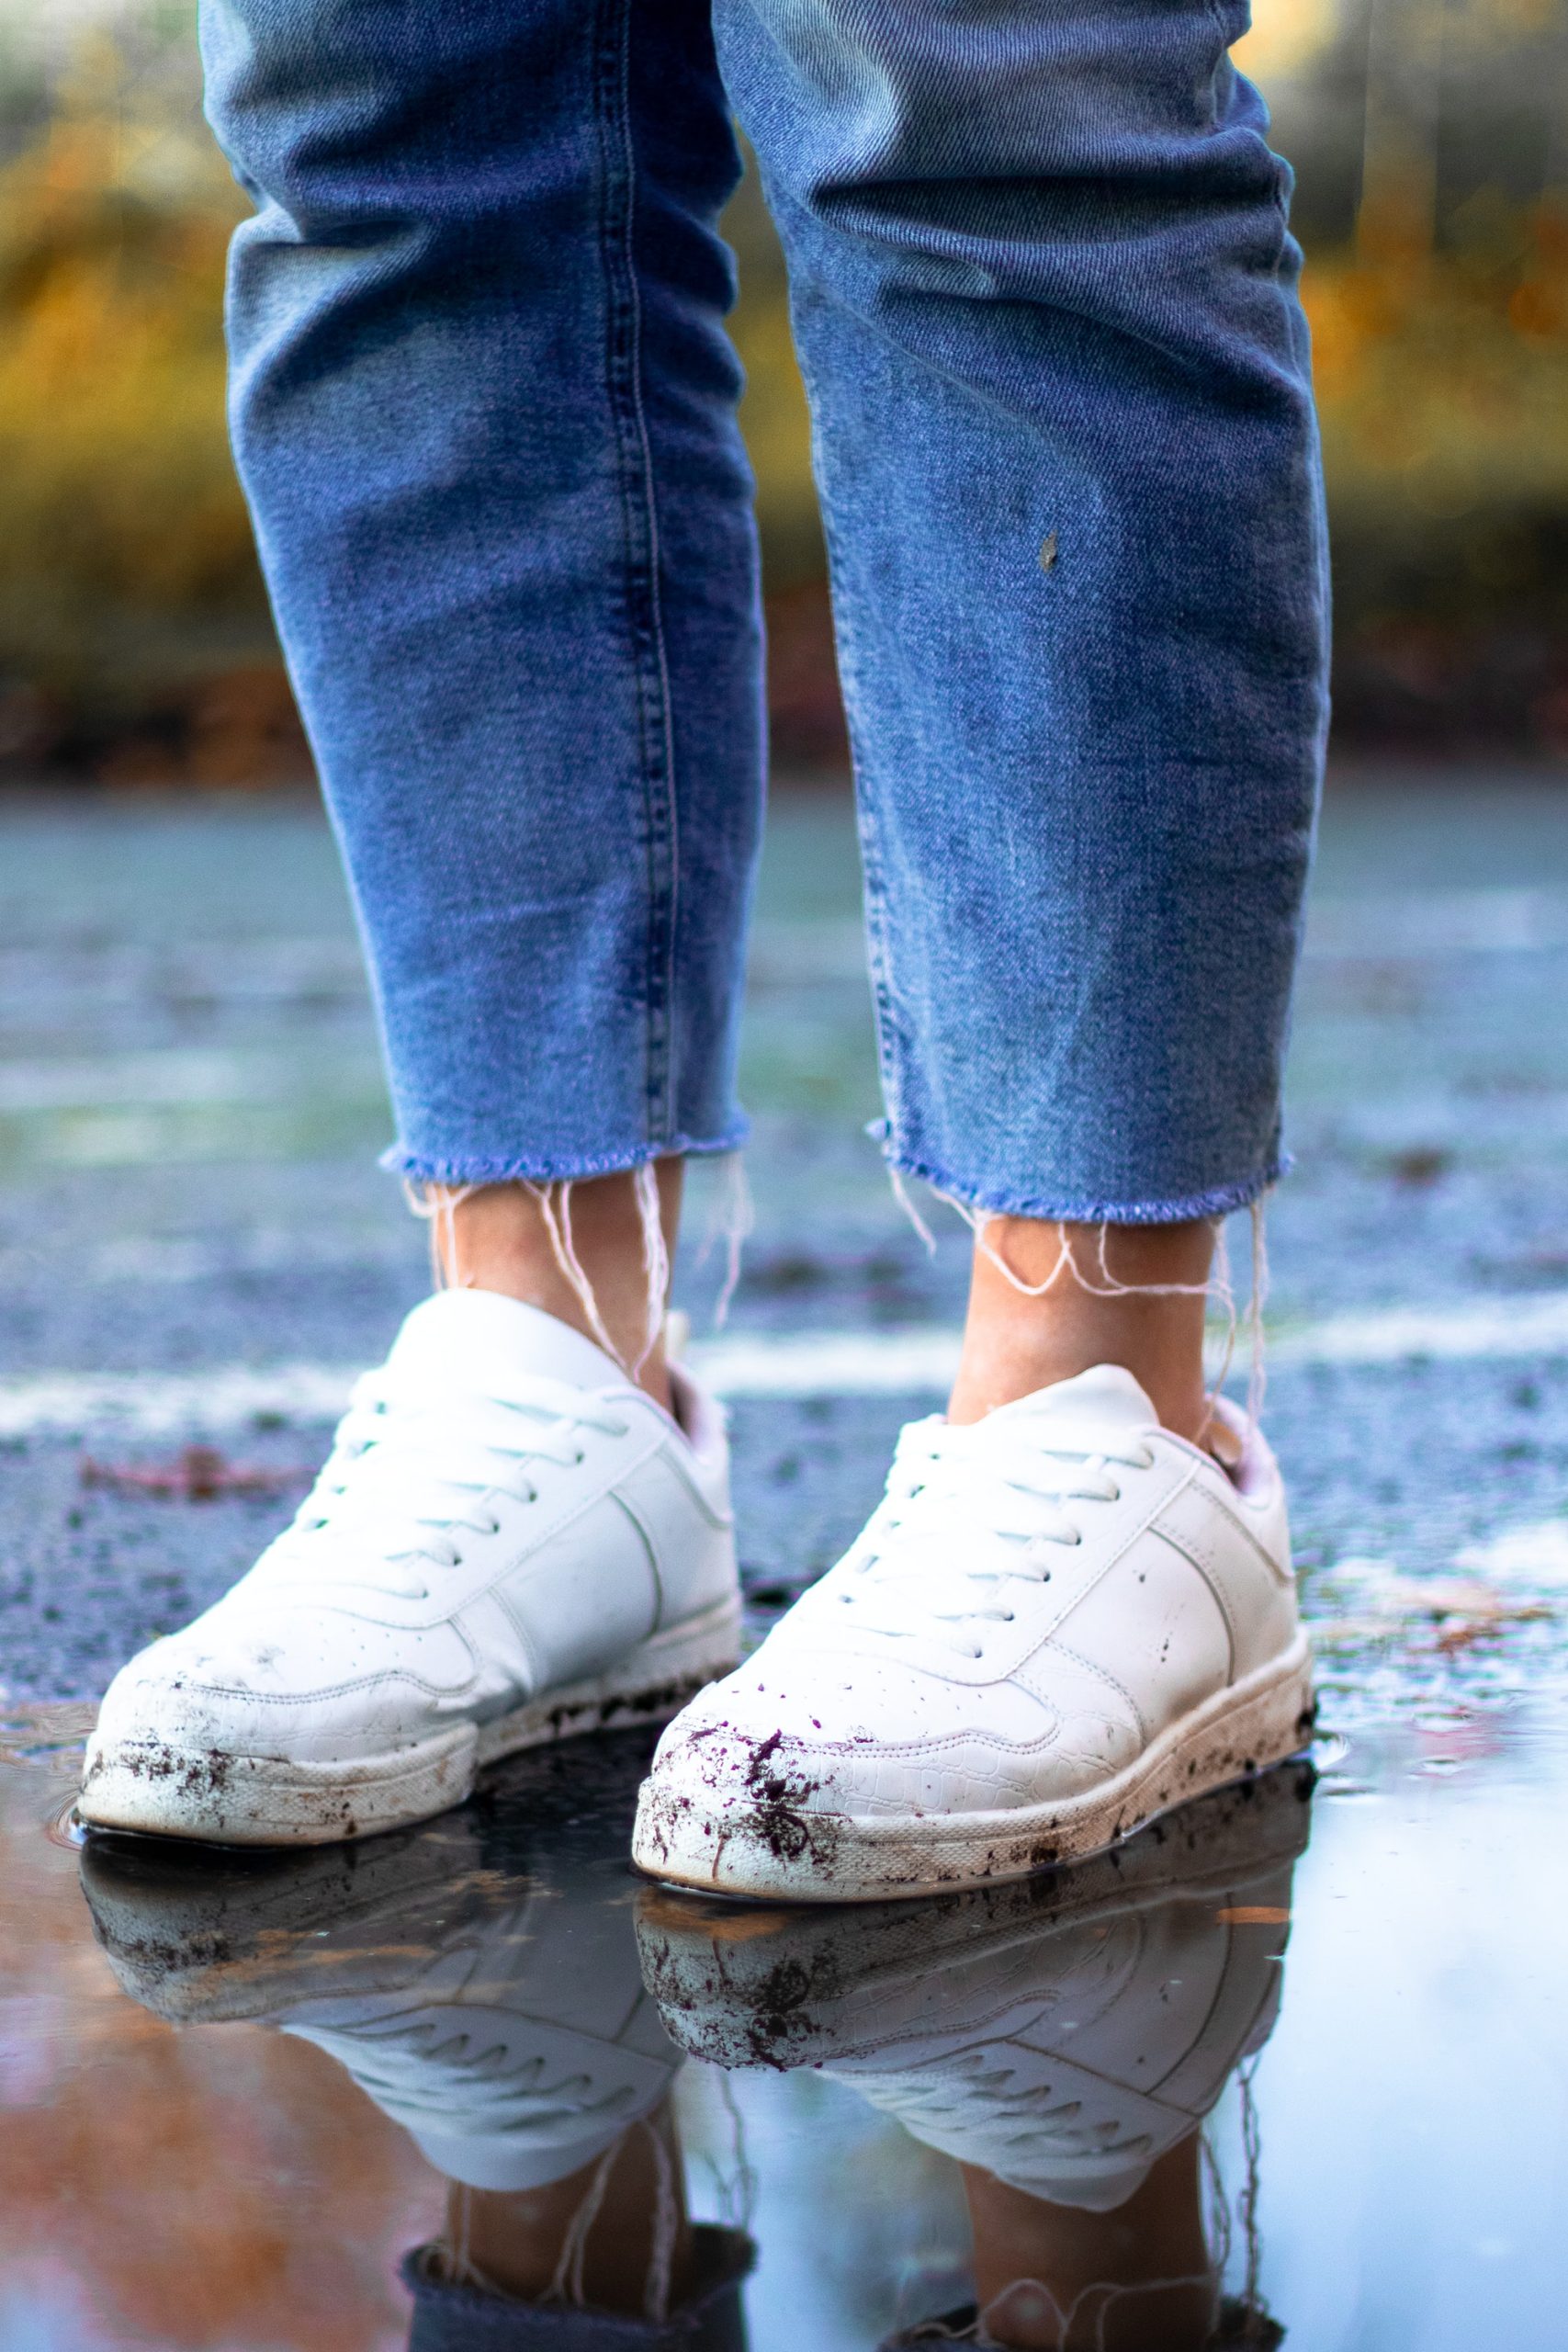 How Do You Get Grass Stains Out Of White Shoes - Get Fashion Today